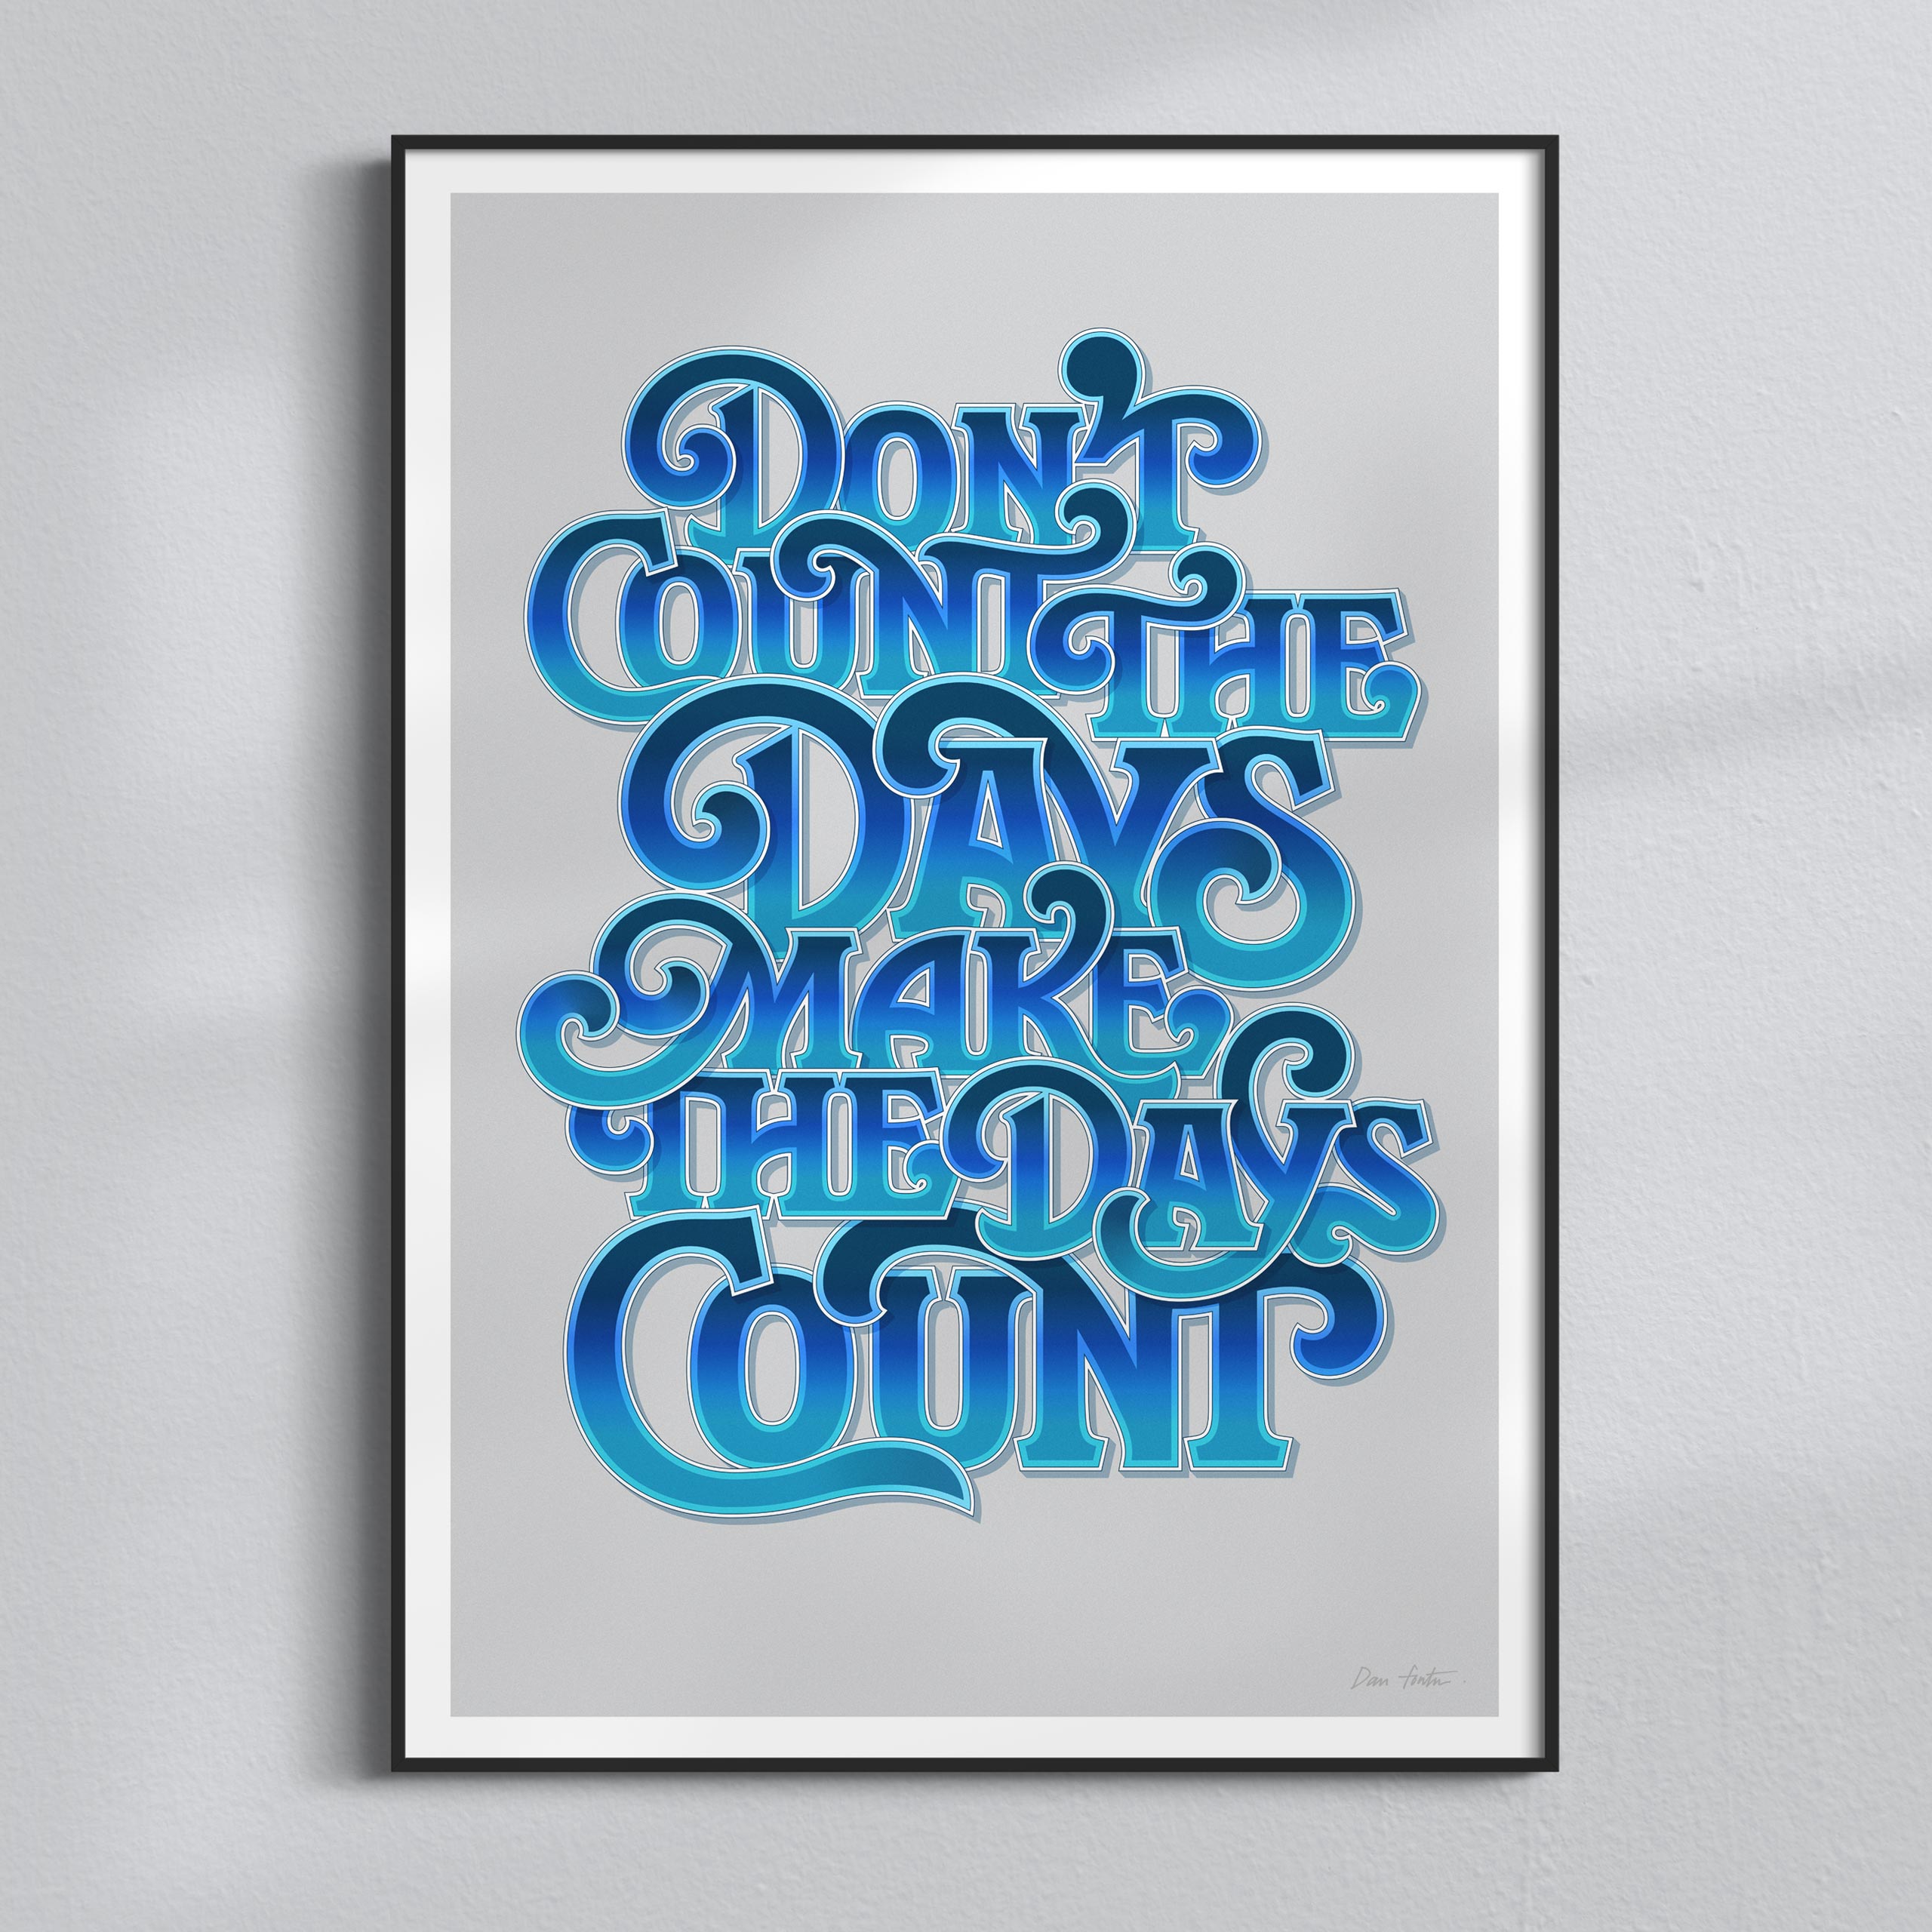 Don't Count the days Poster BLUE by Dan Forster